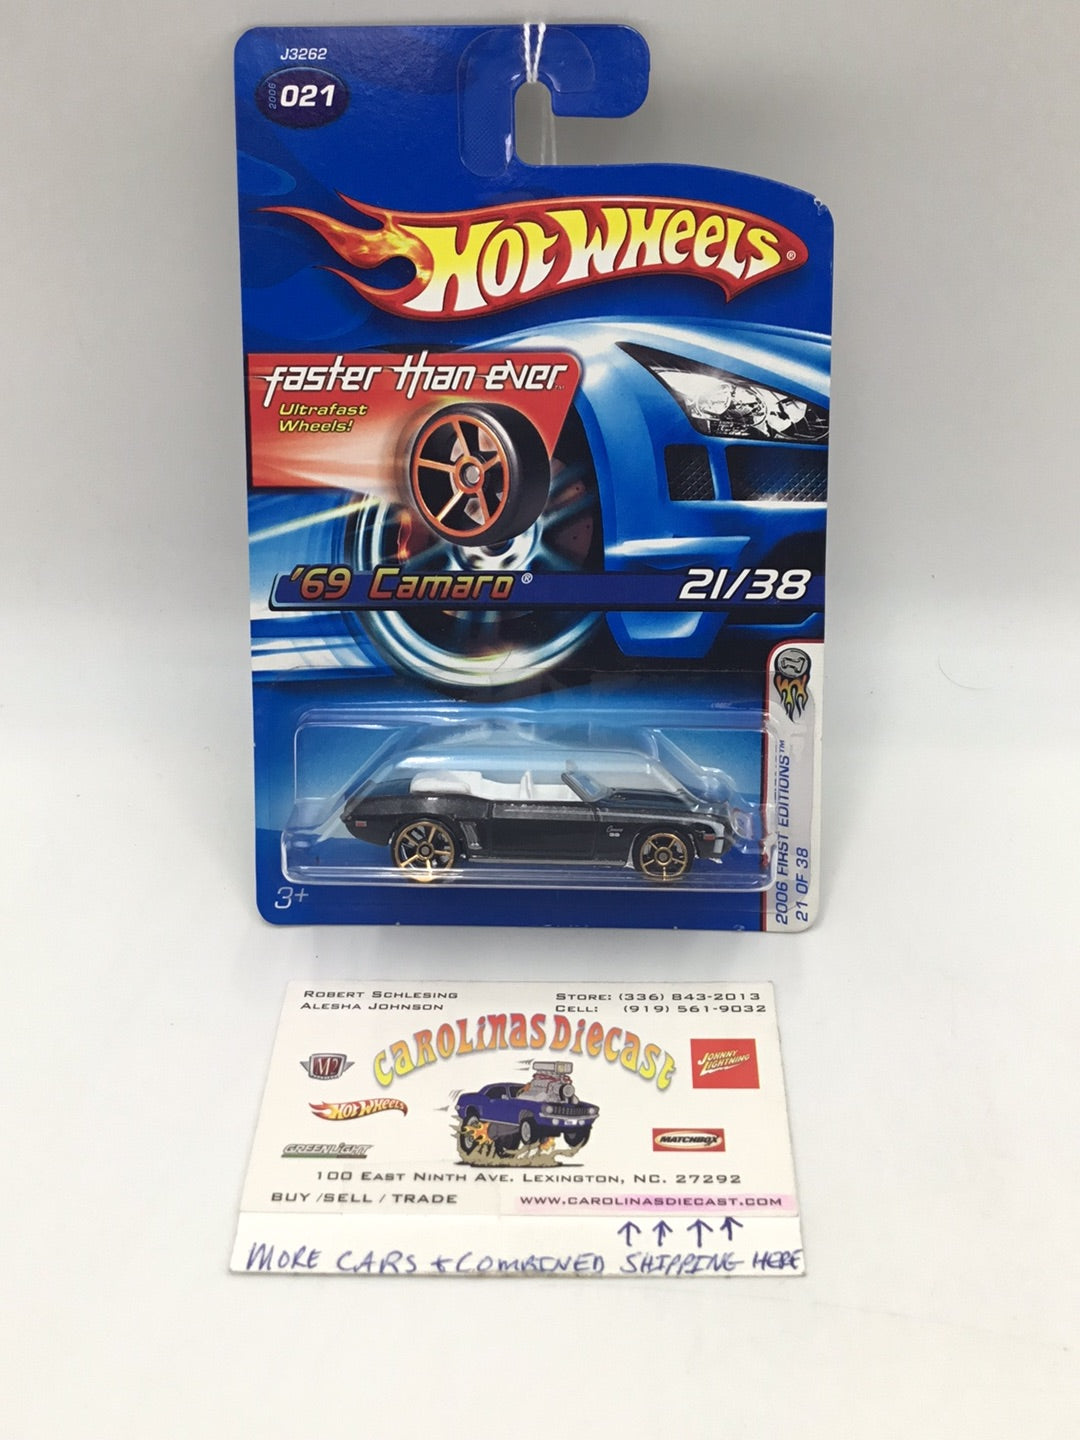 2006 Hot wheels #21 69 Camaro 21/38 Black first edition fte faster than ever 18D